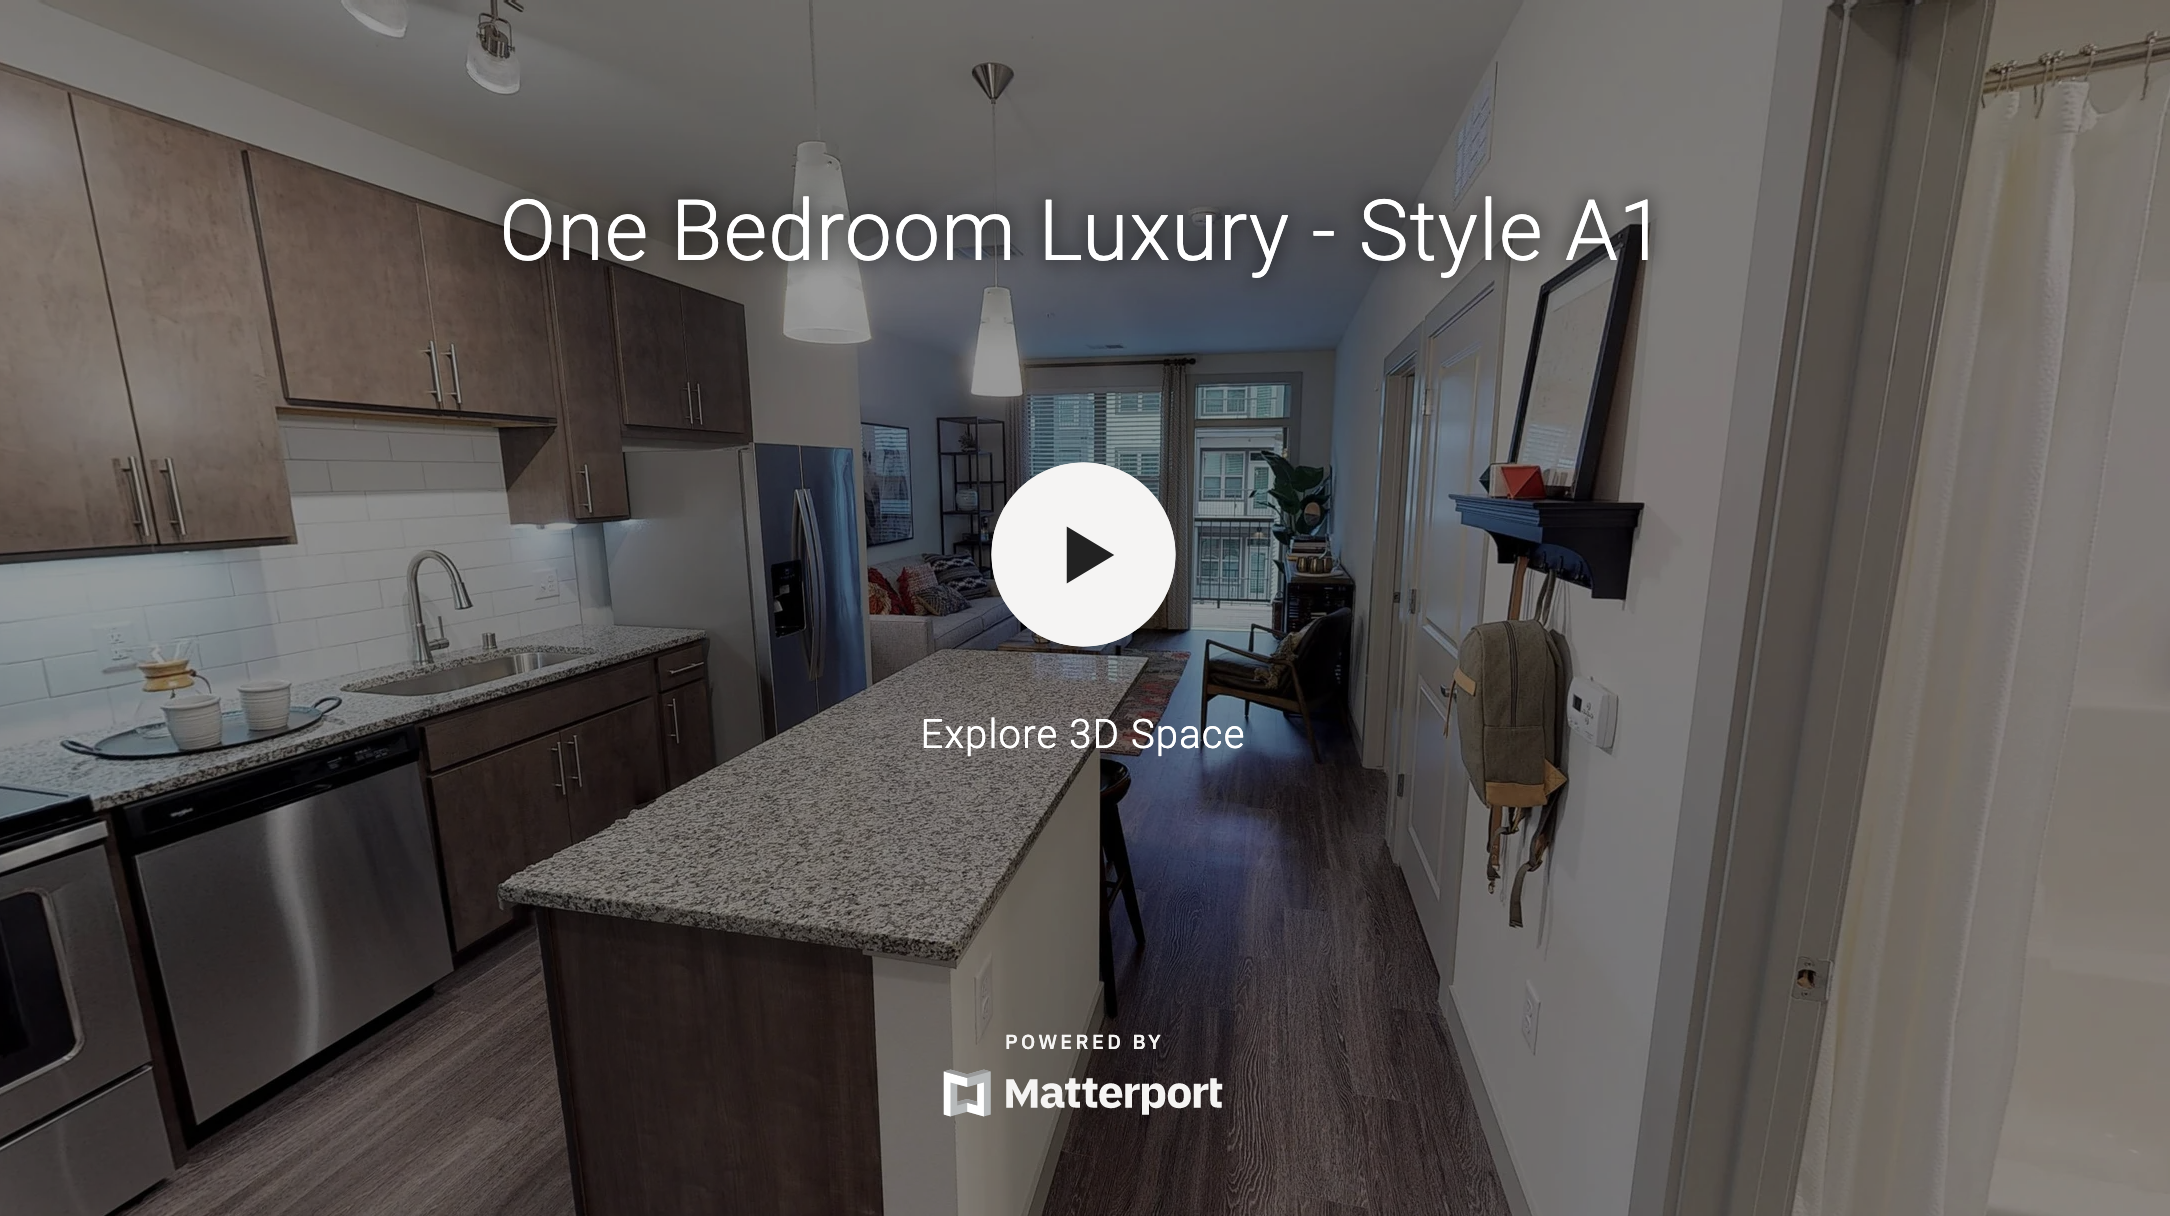 One Bedroom Luxury - Style A1